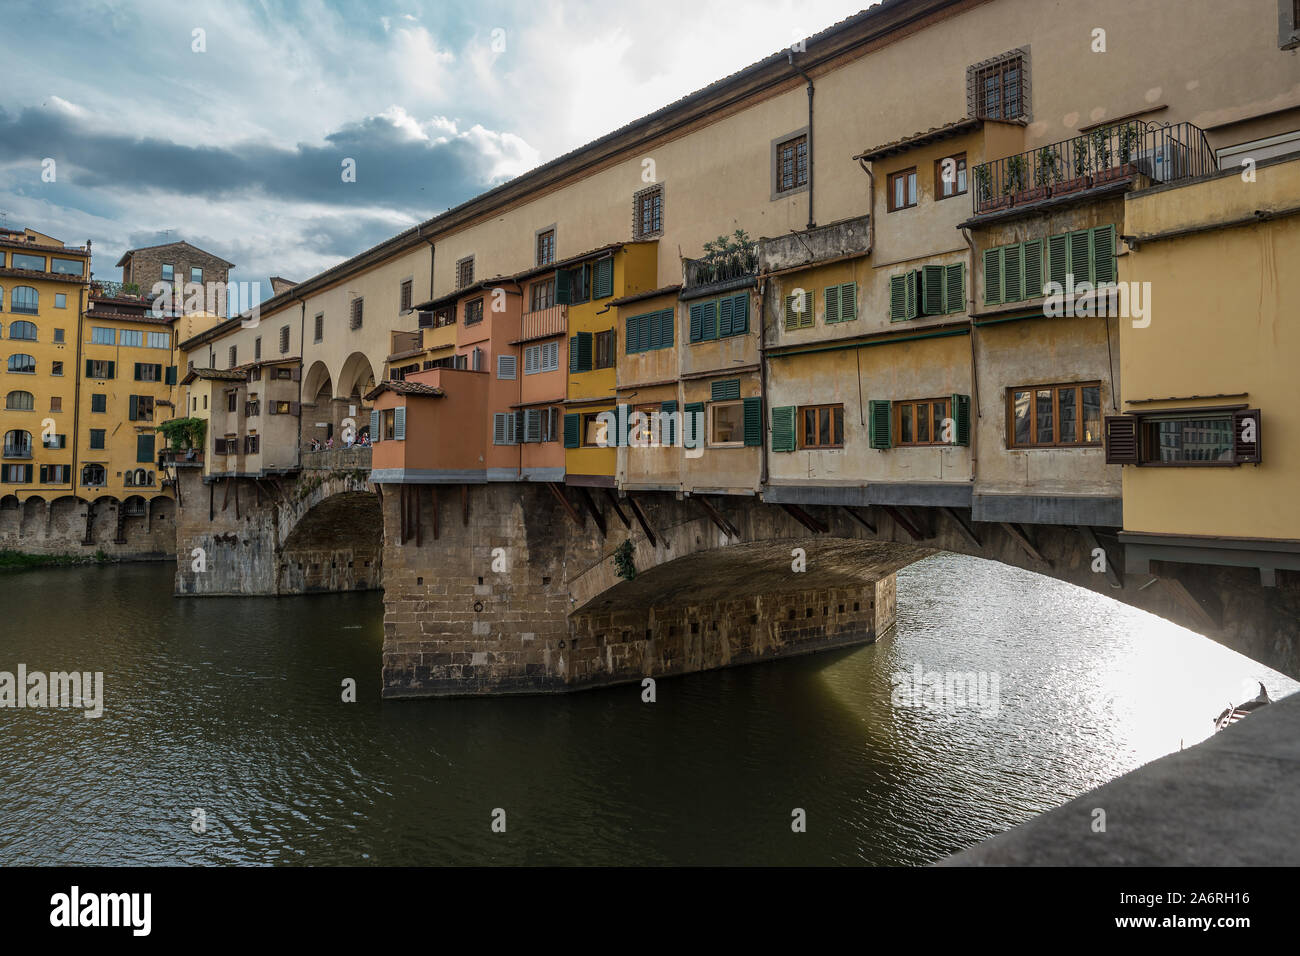 Side view of medieval stone bridge Ponte Vecchio over the Arno River in Florence, Tuscany, Italy. View from the Lungarno degli Archibusieri. Florence is a popular tourist destination of Europe. Stock Photo